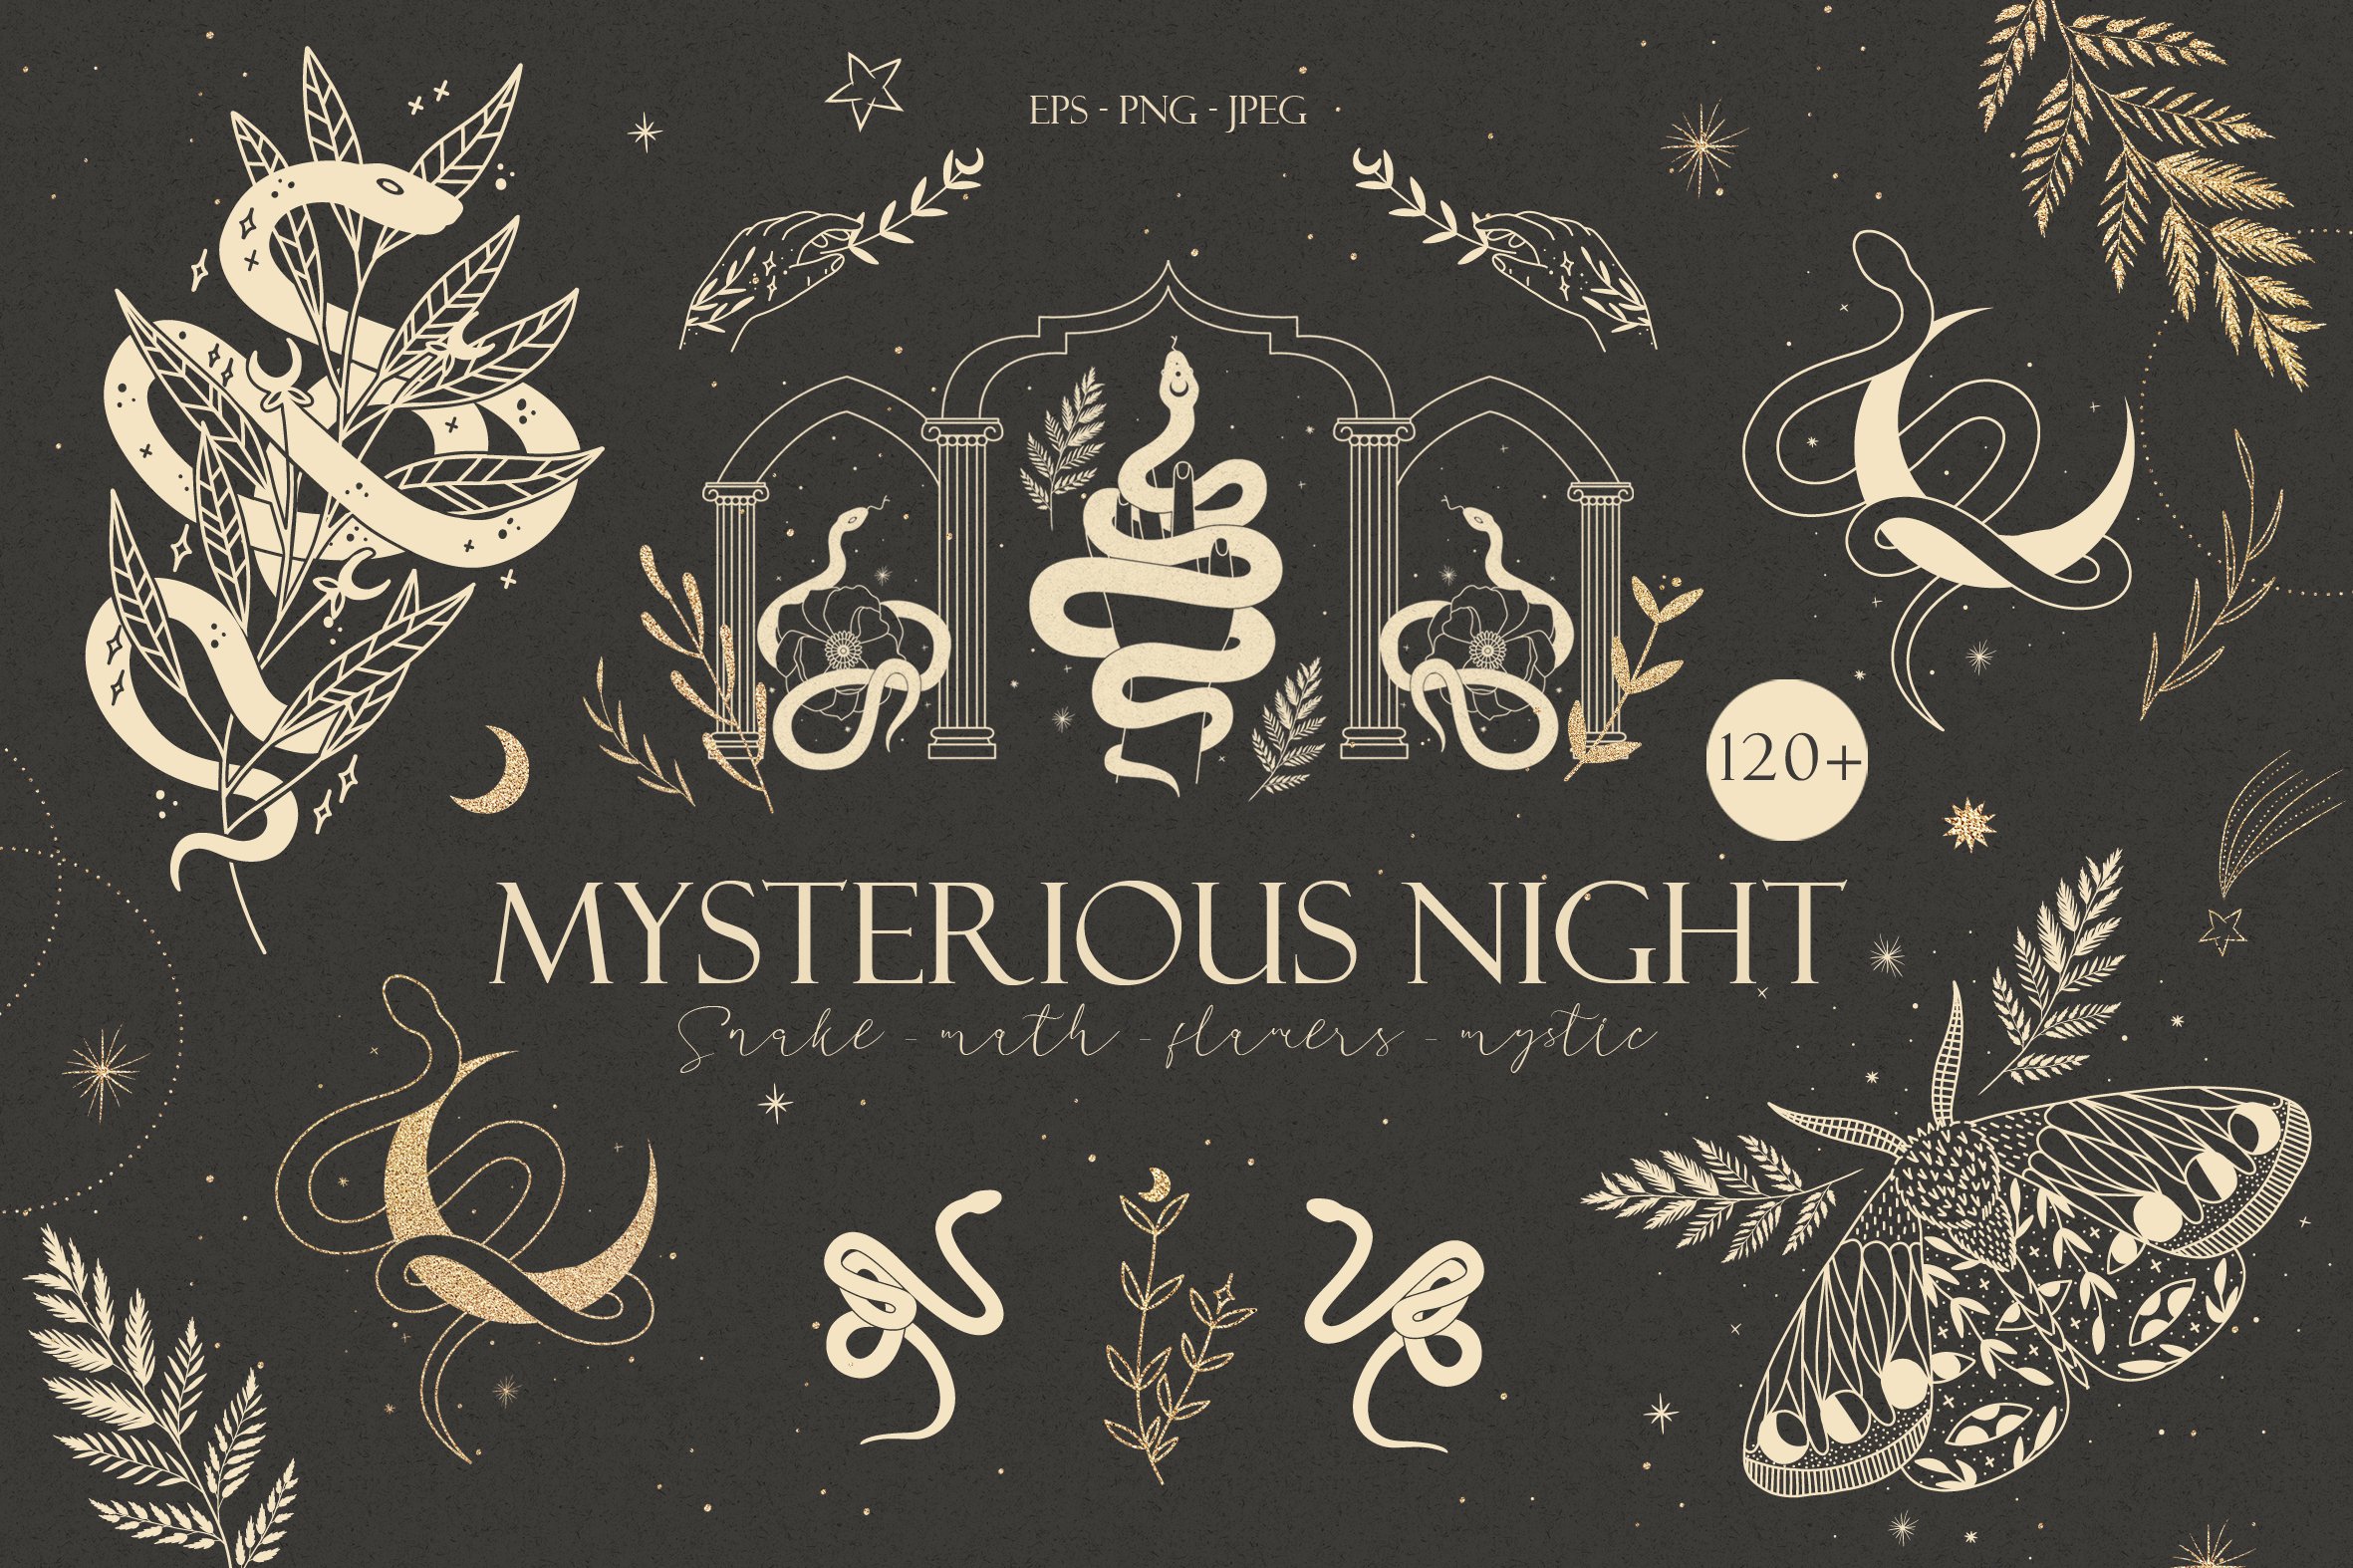 120+ Mysterious night cover image.